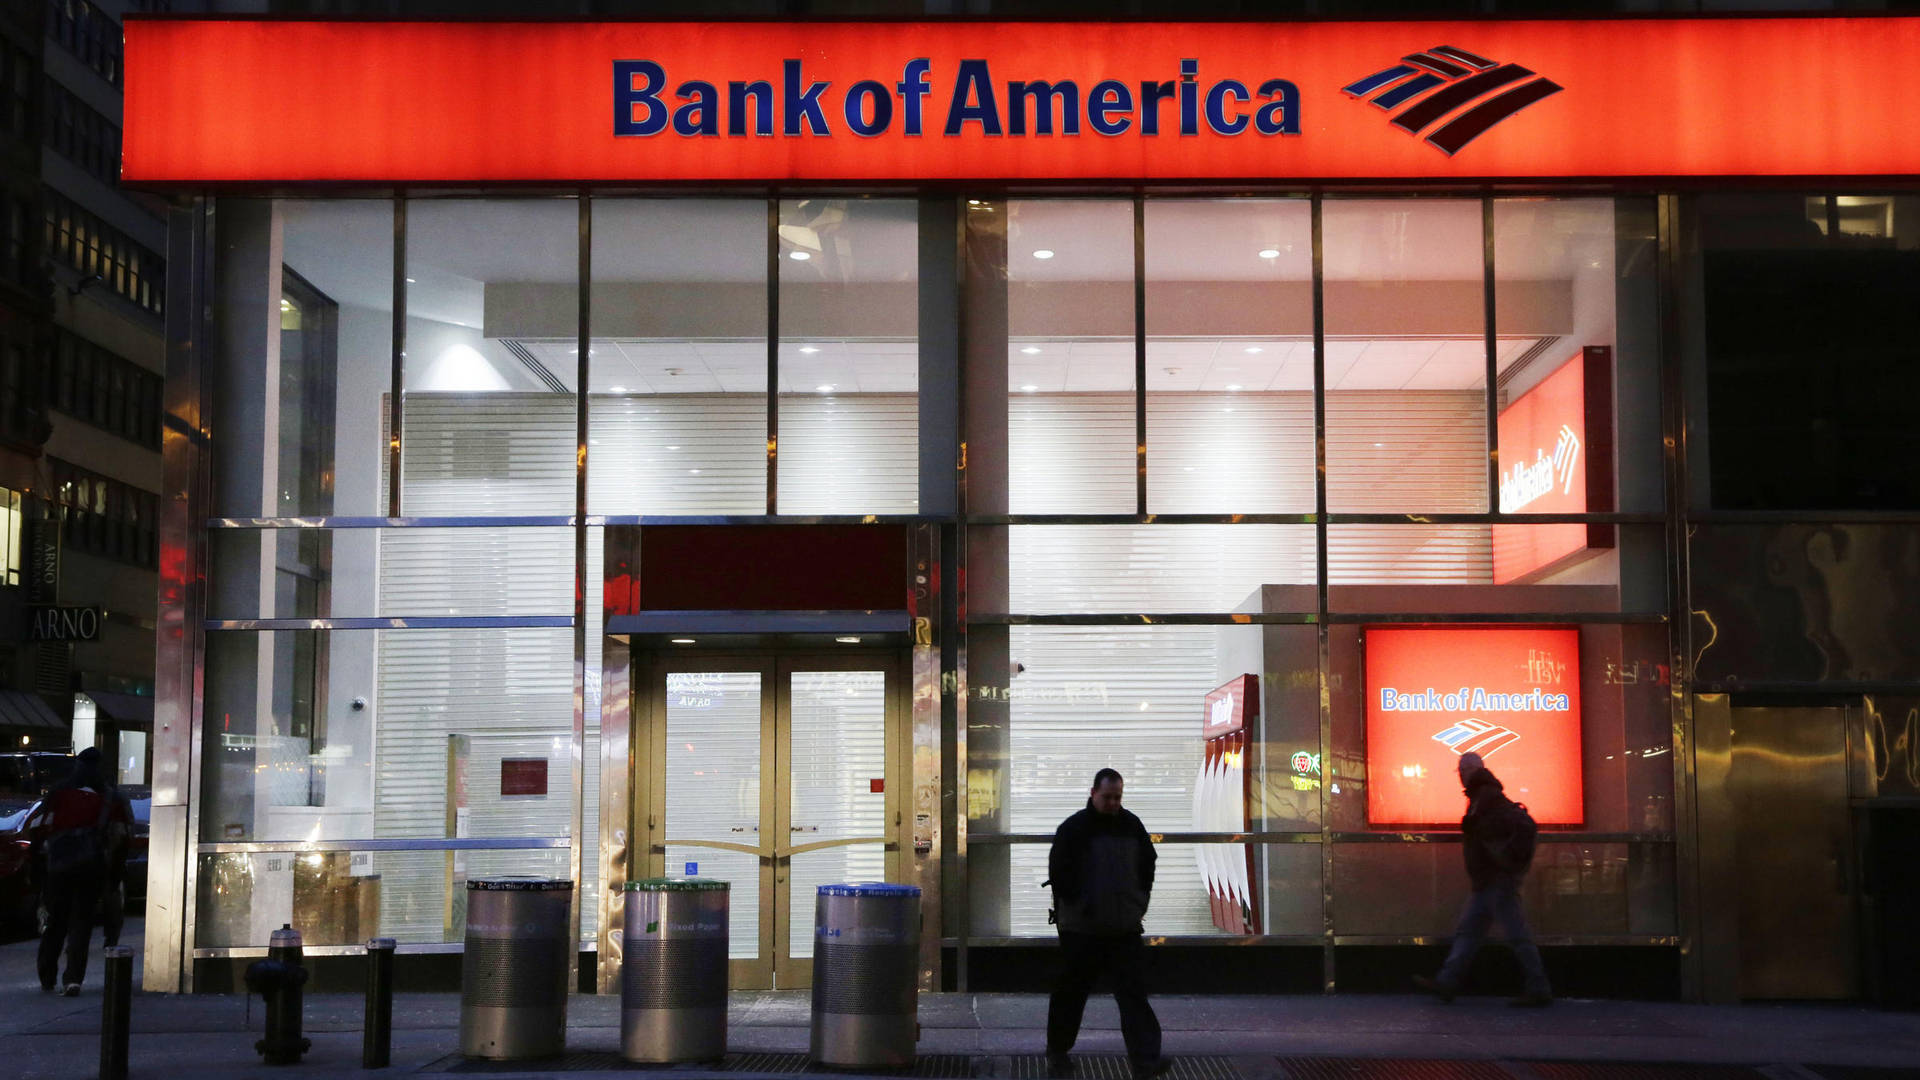 Bank Of America Facade At Night Background